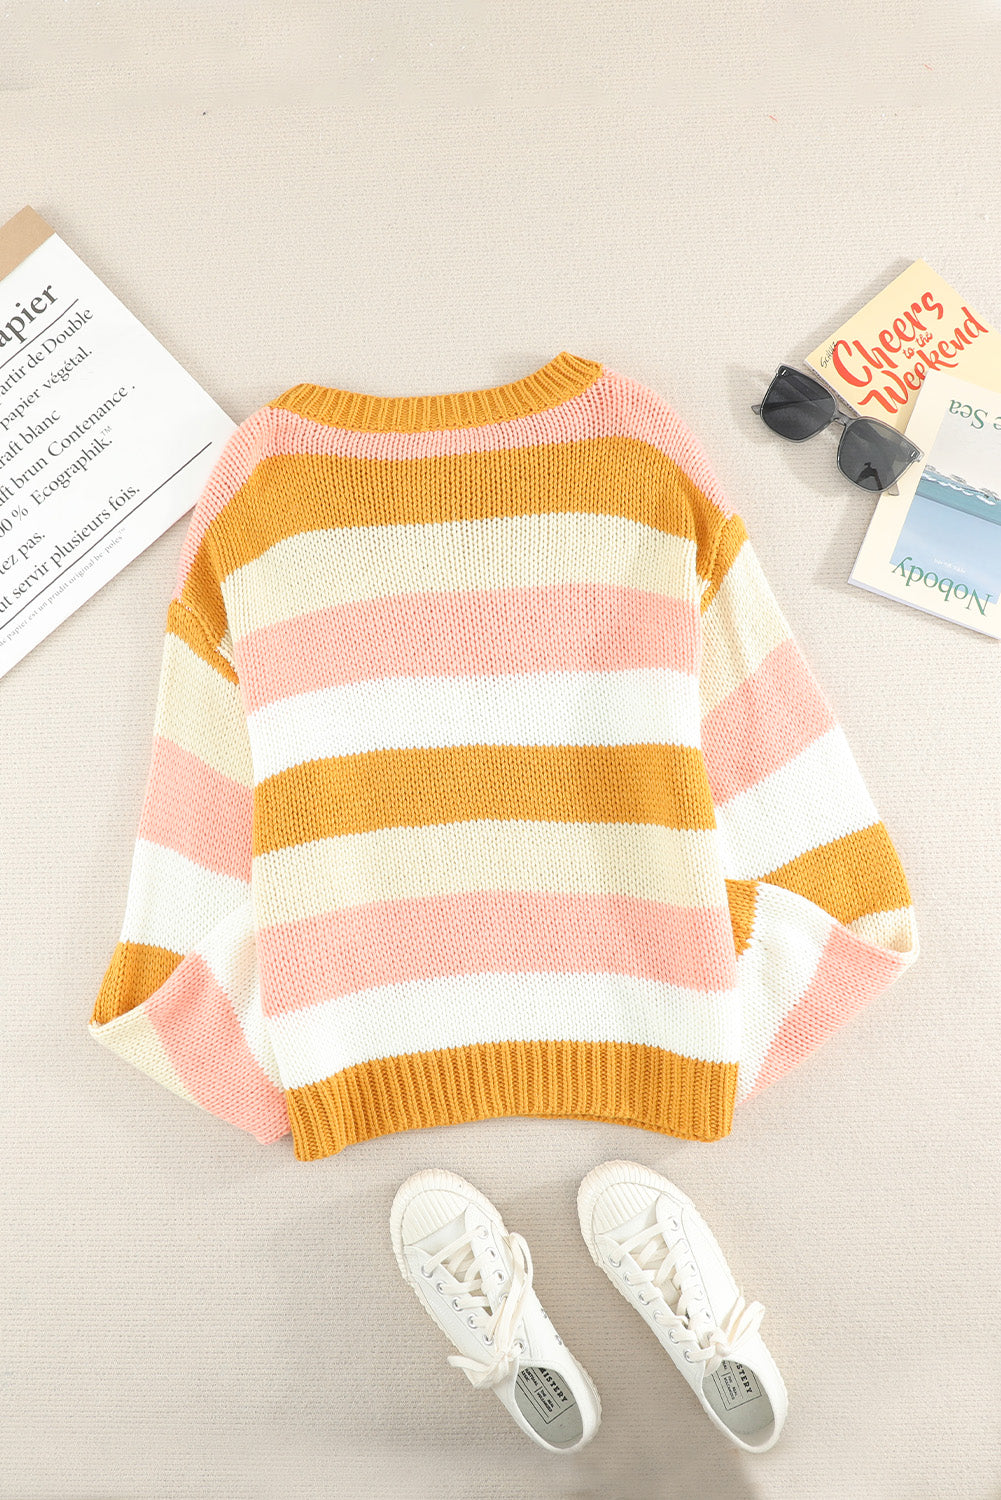 Striped Dropped Shoulder Knitted Pullover Sweater-Sweater-PureDesignTees